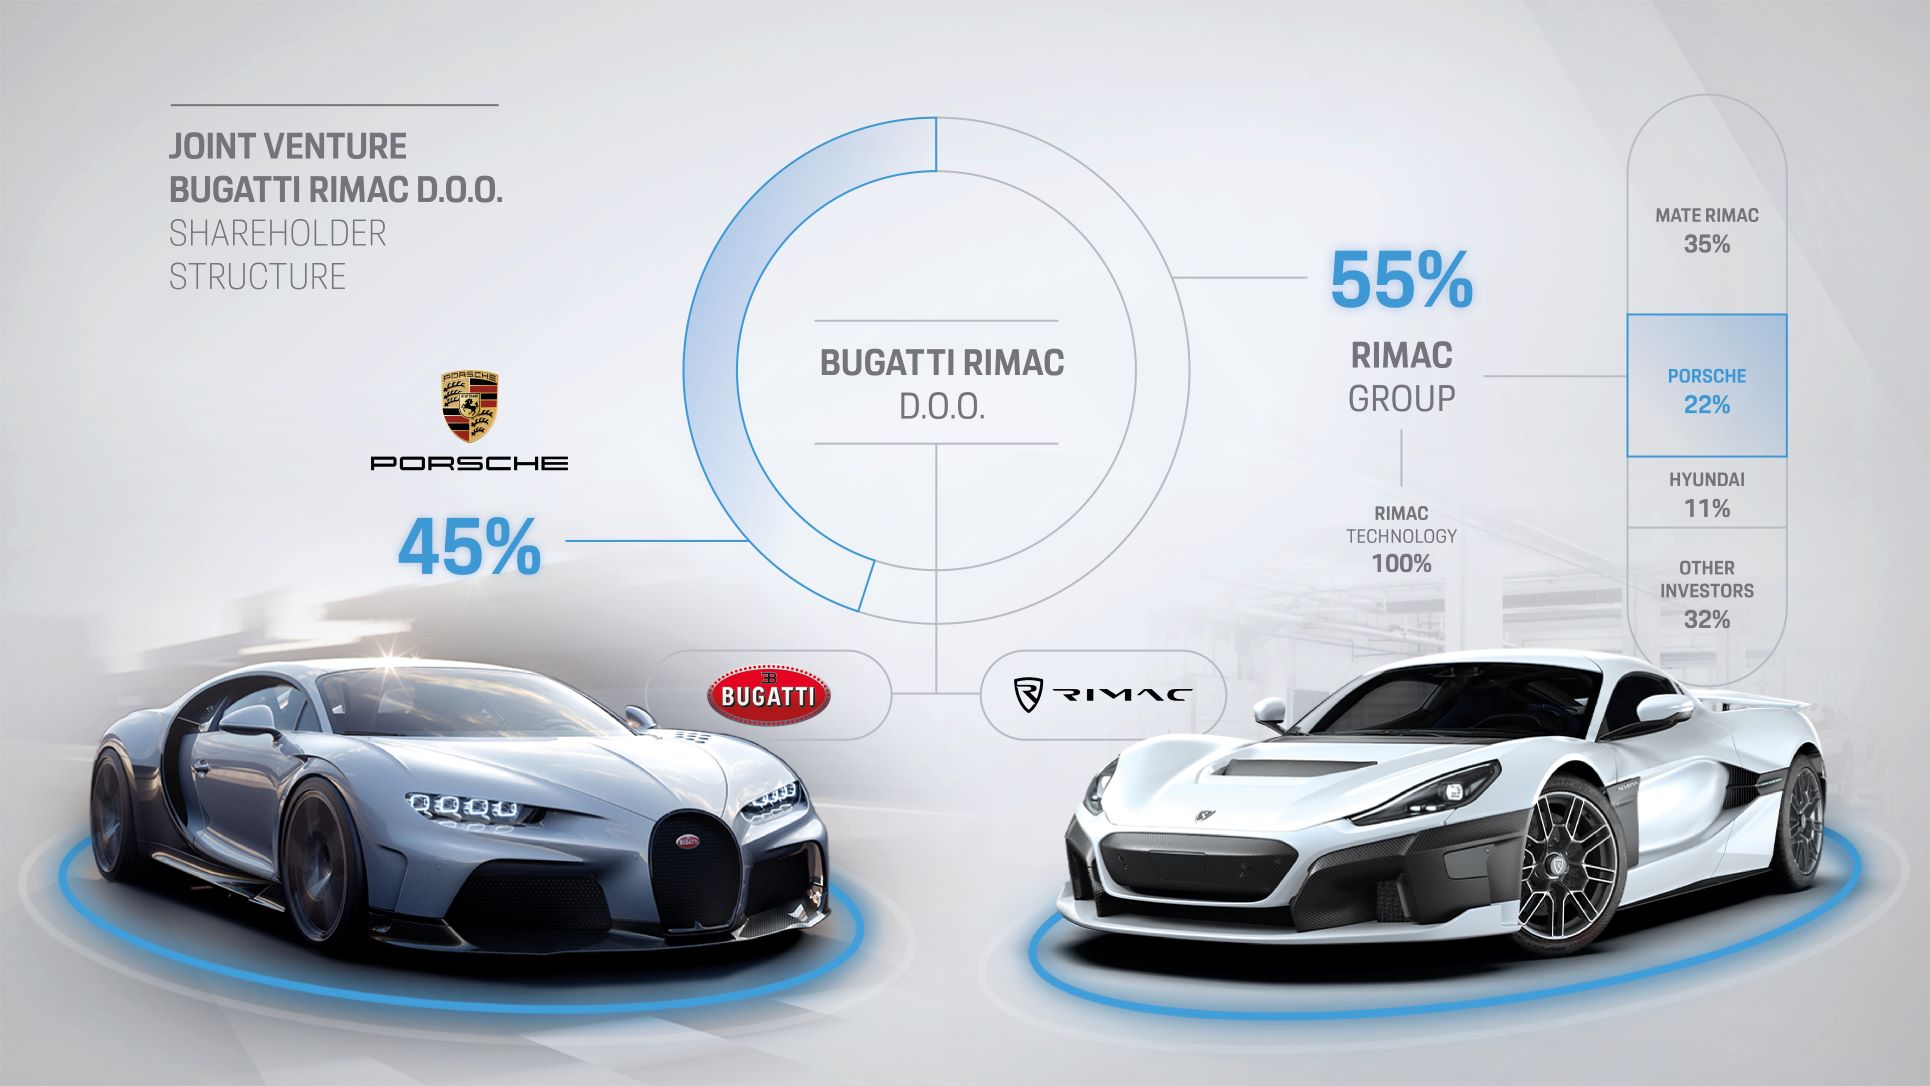 The technicalities of the Bugatti Rimac joint venture